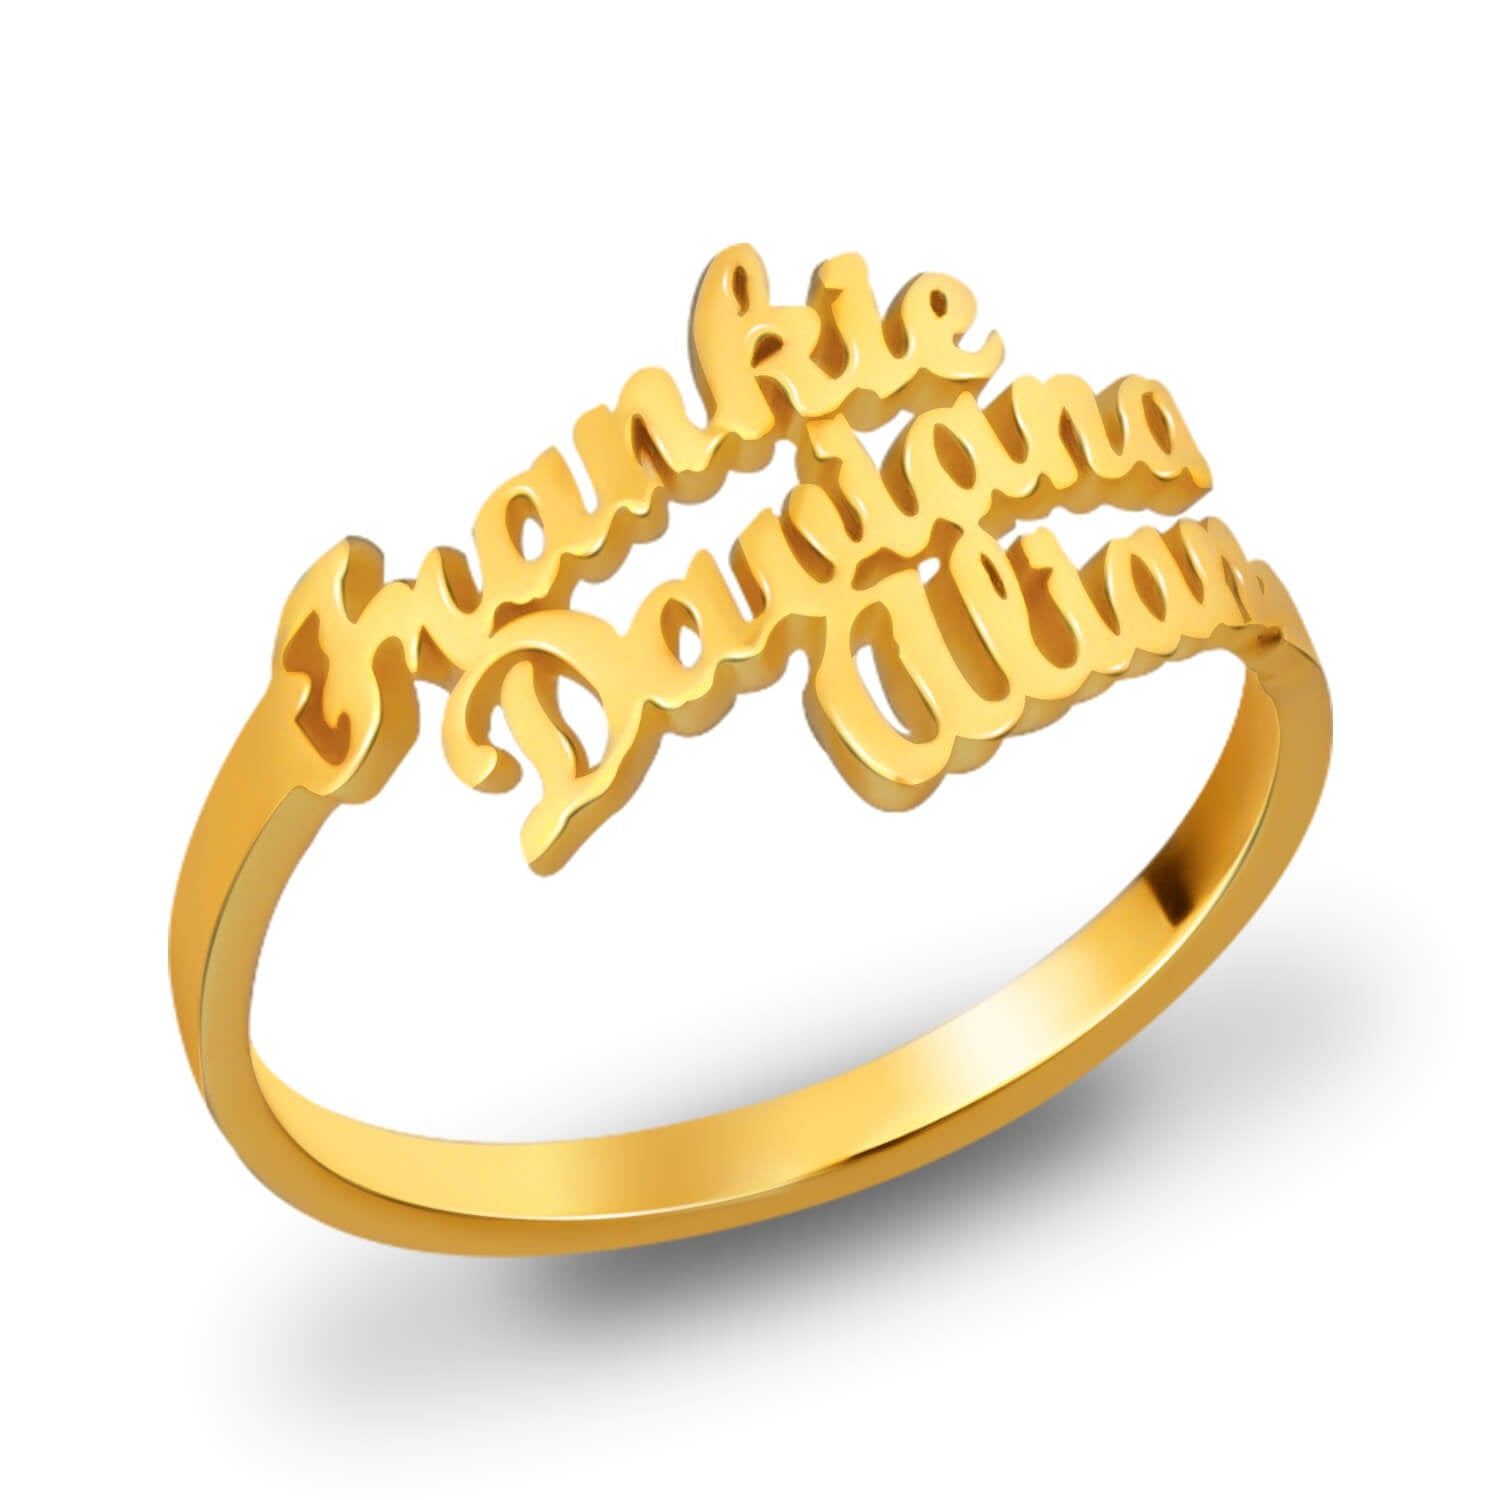 Three Names Personalized Custom Ring Gold Plated-silviax